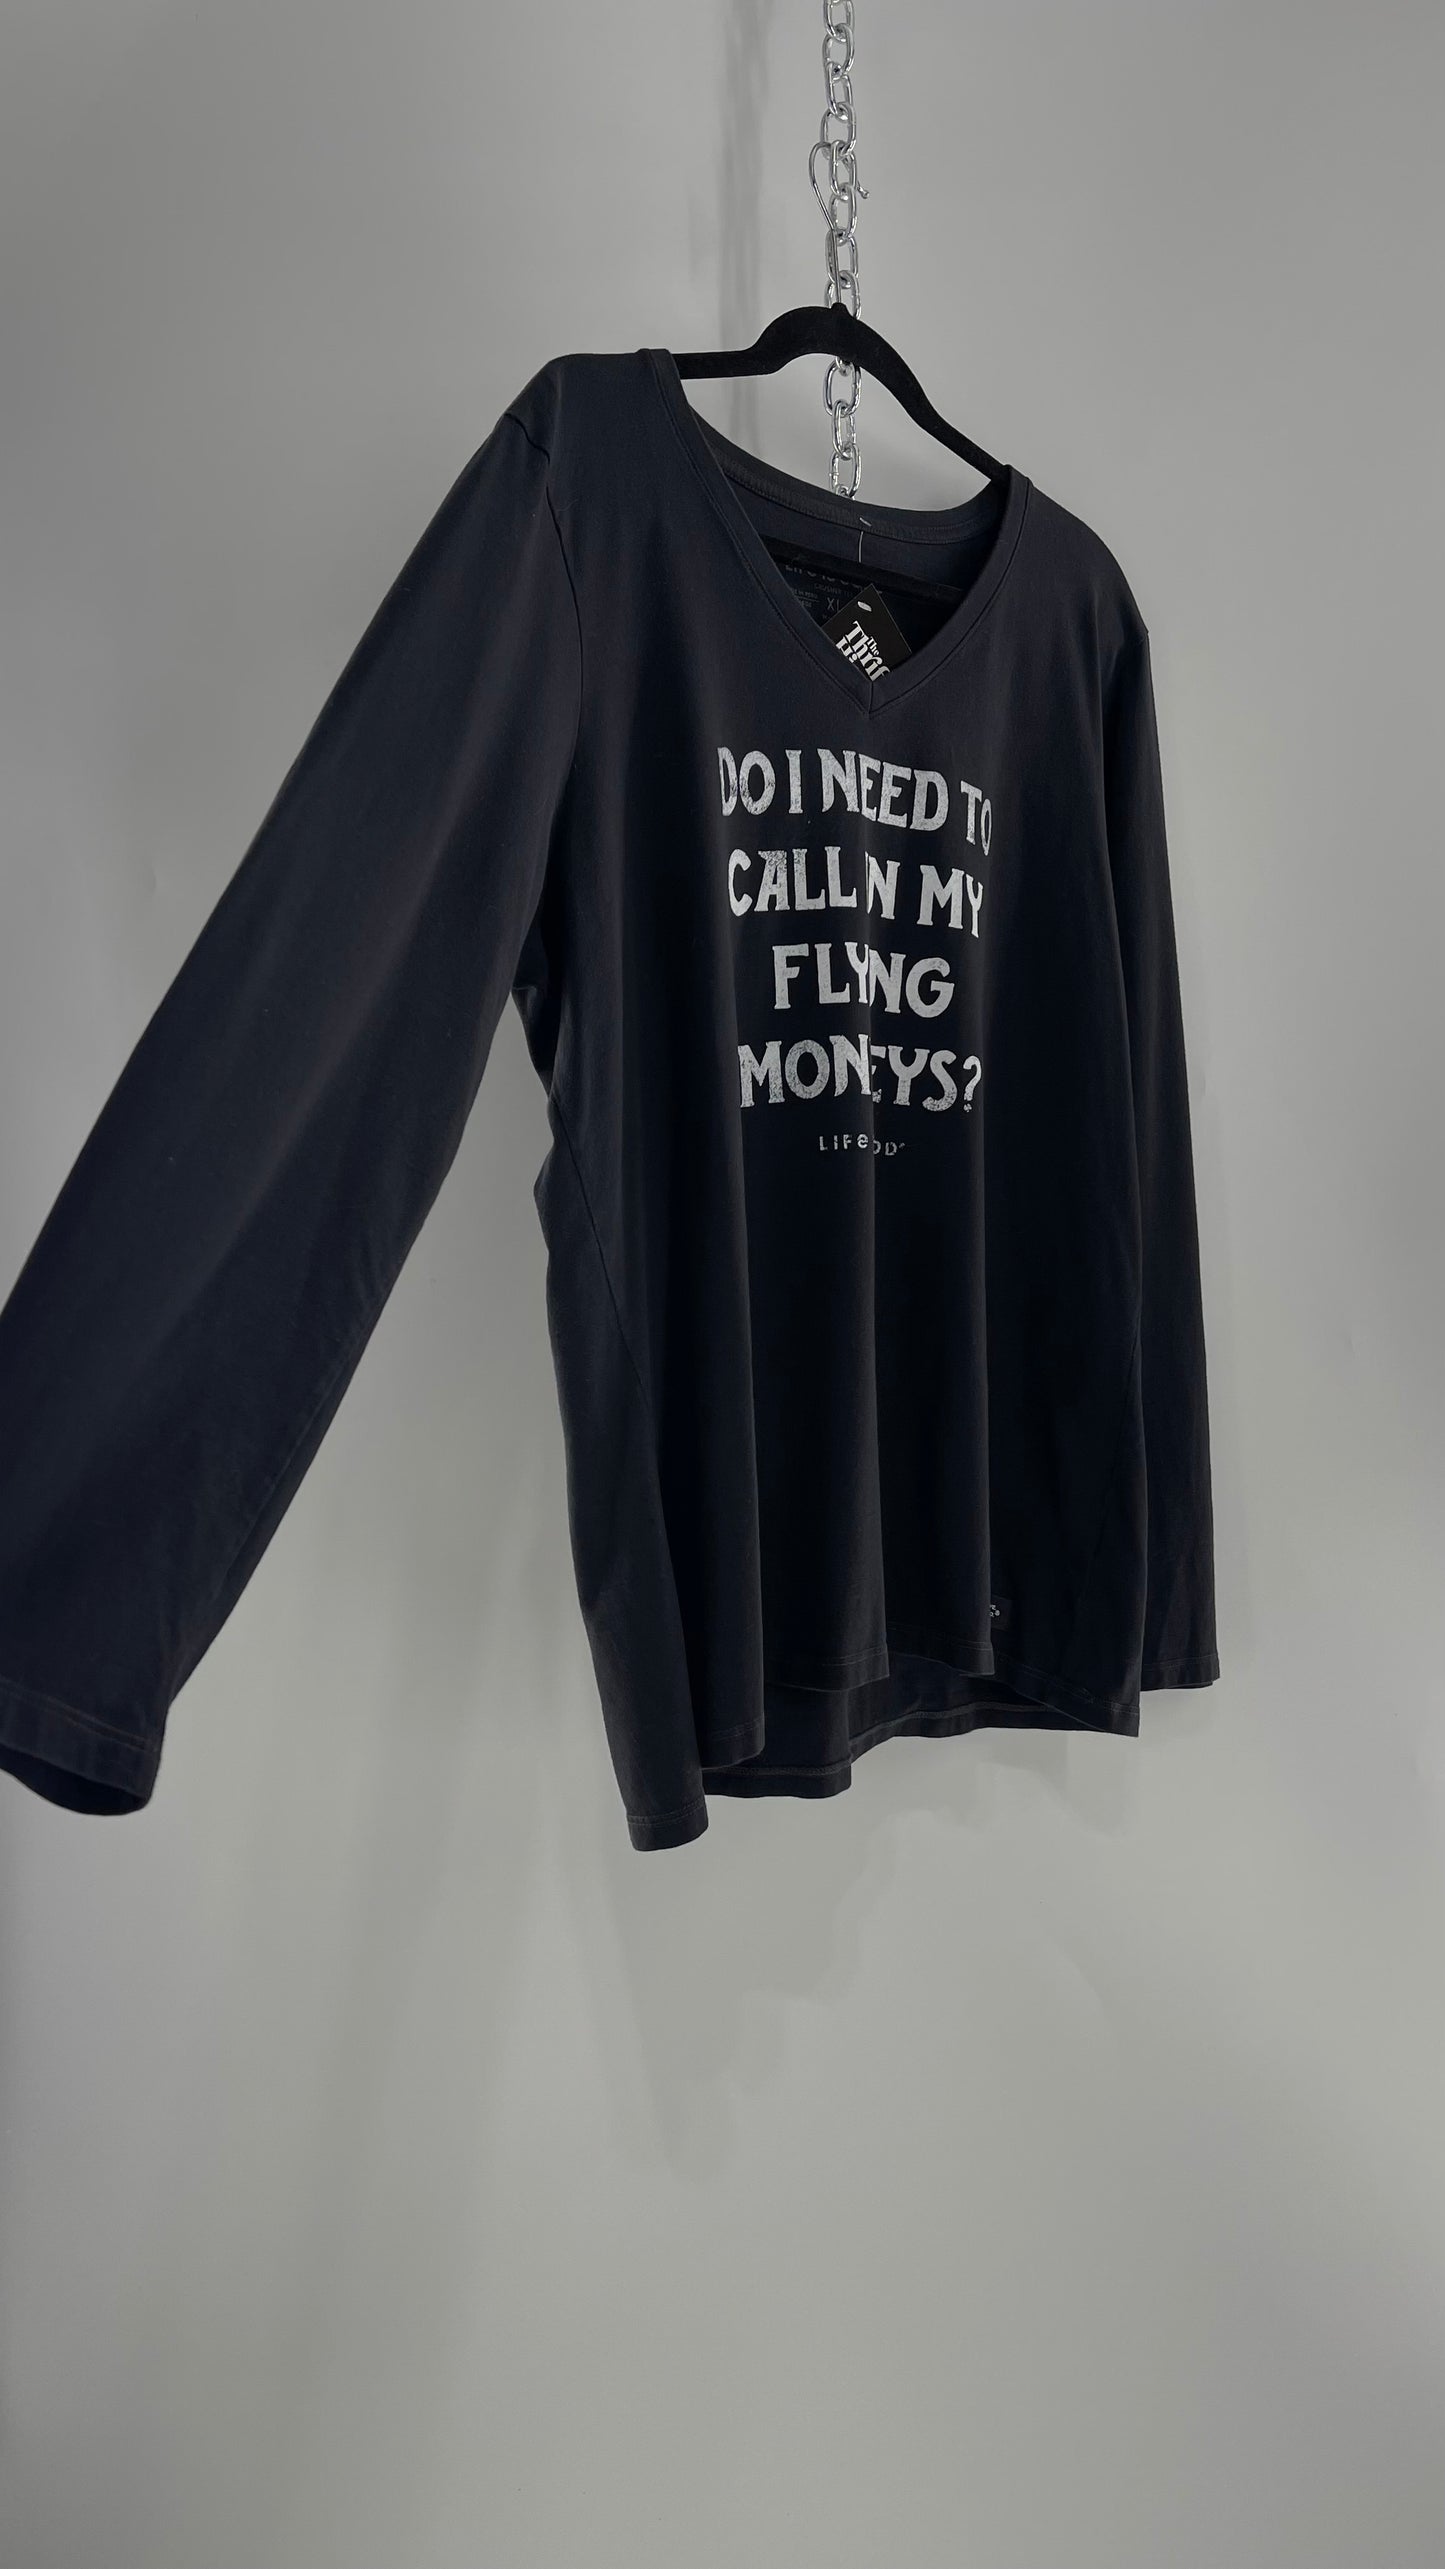 LIFE IS GOOD “Do I need to call in my Flying Monkeys?” T Shirt (XL)